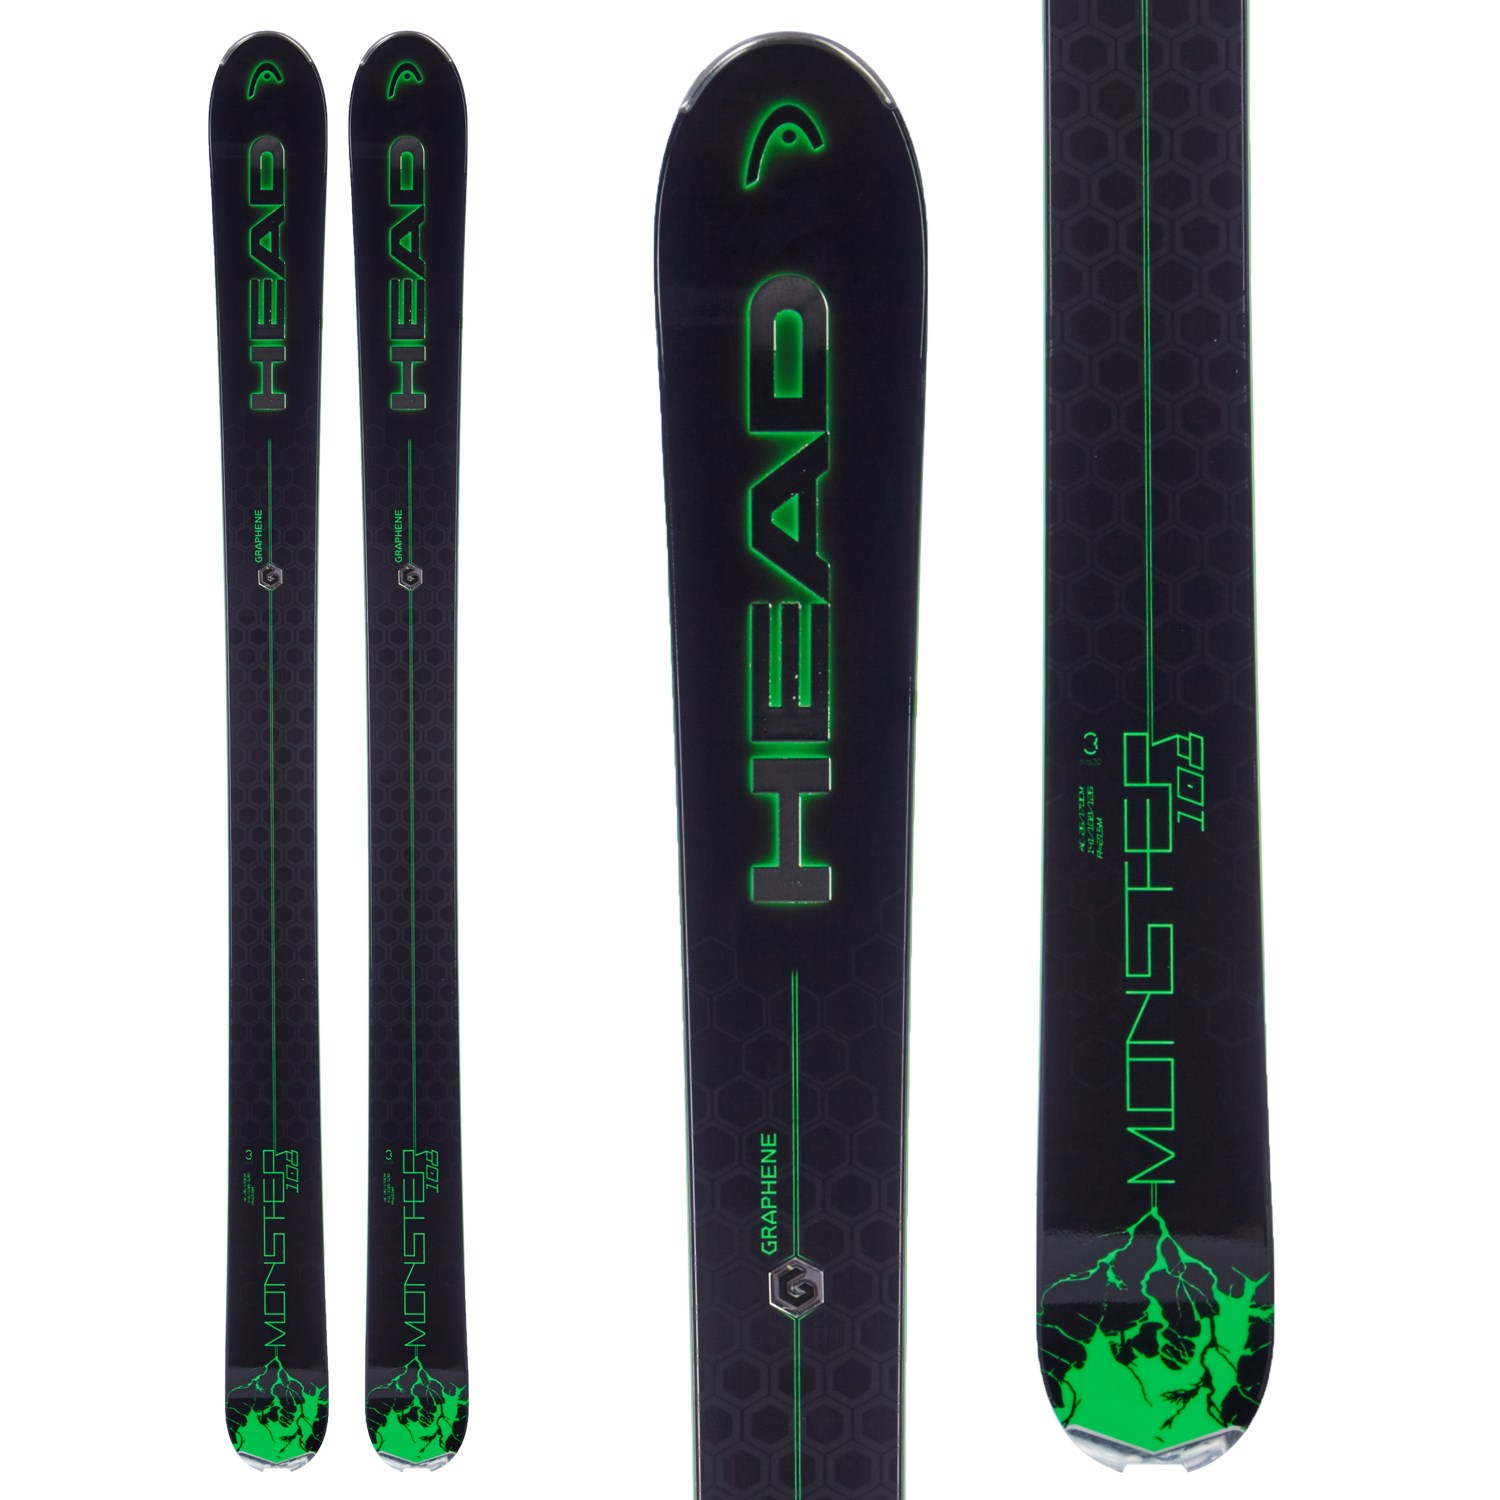 Head Monster 108 Ti Skis + Marker Squire Ski Bindings | evo outlet